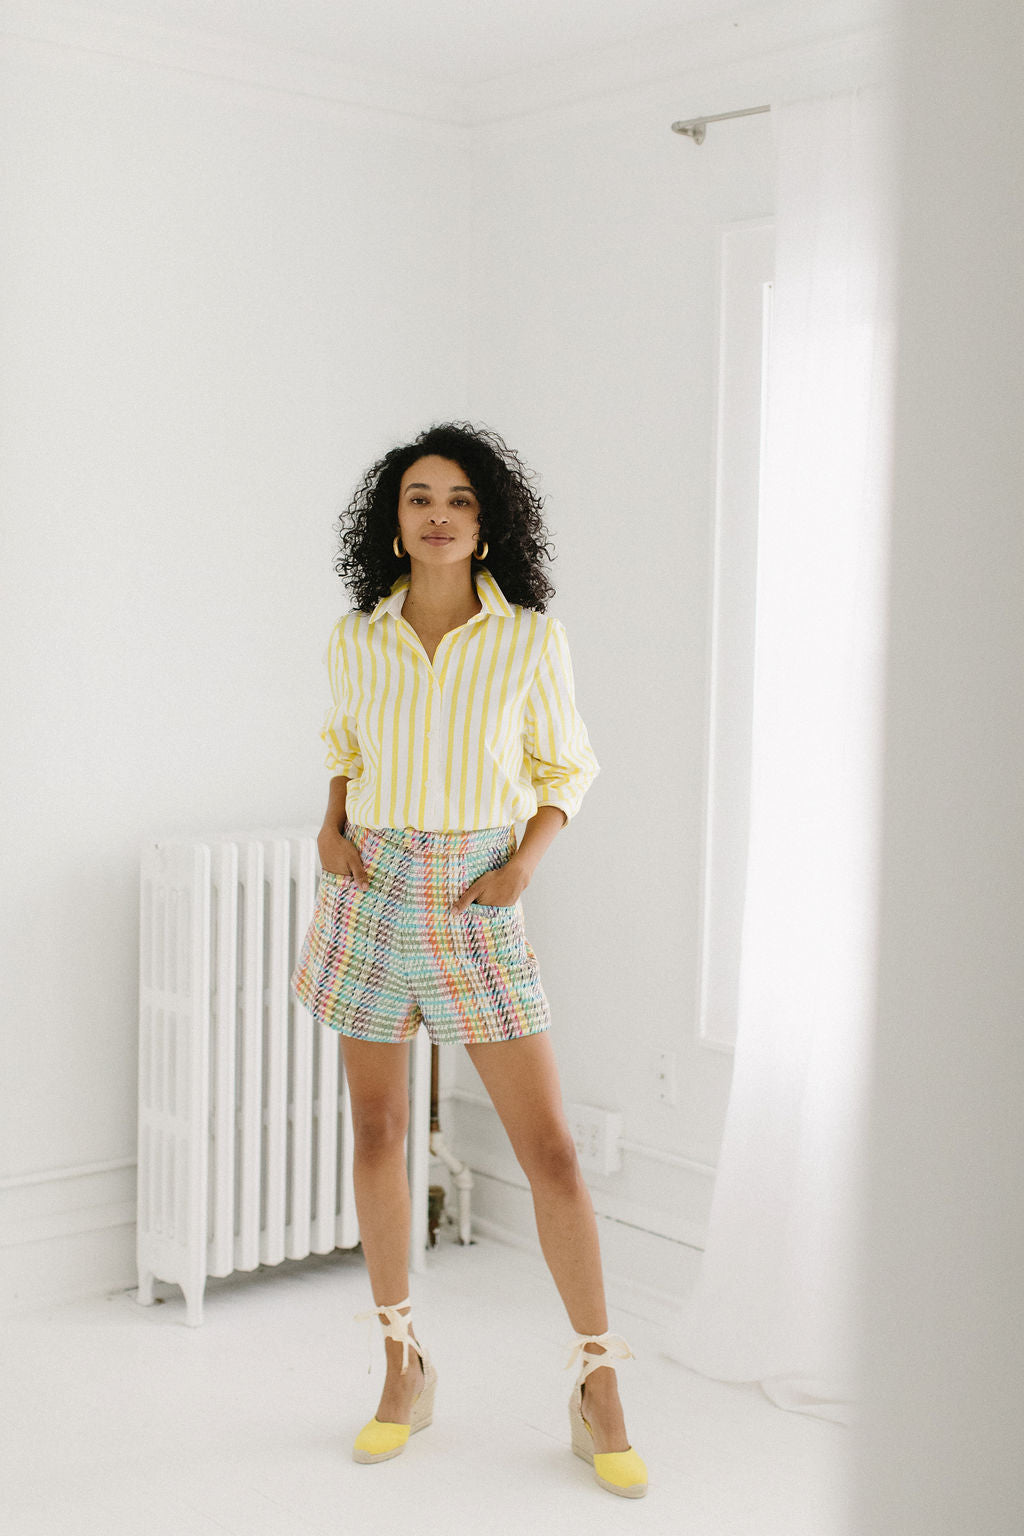 A full body shot of a woman with olive skin and short, black, curly hair staring directly at the camera with a small smile. She's wearing chunky gold hoop earrings, a white and yellow striped button down shirt pushed up to the elbows and a pair of colorful plaid shorts. She's wearing a pair of yellow espadrille heeels that are tied around her ankles. You can see a window and a white radiator in the background of the image.